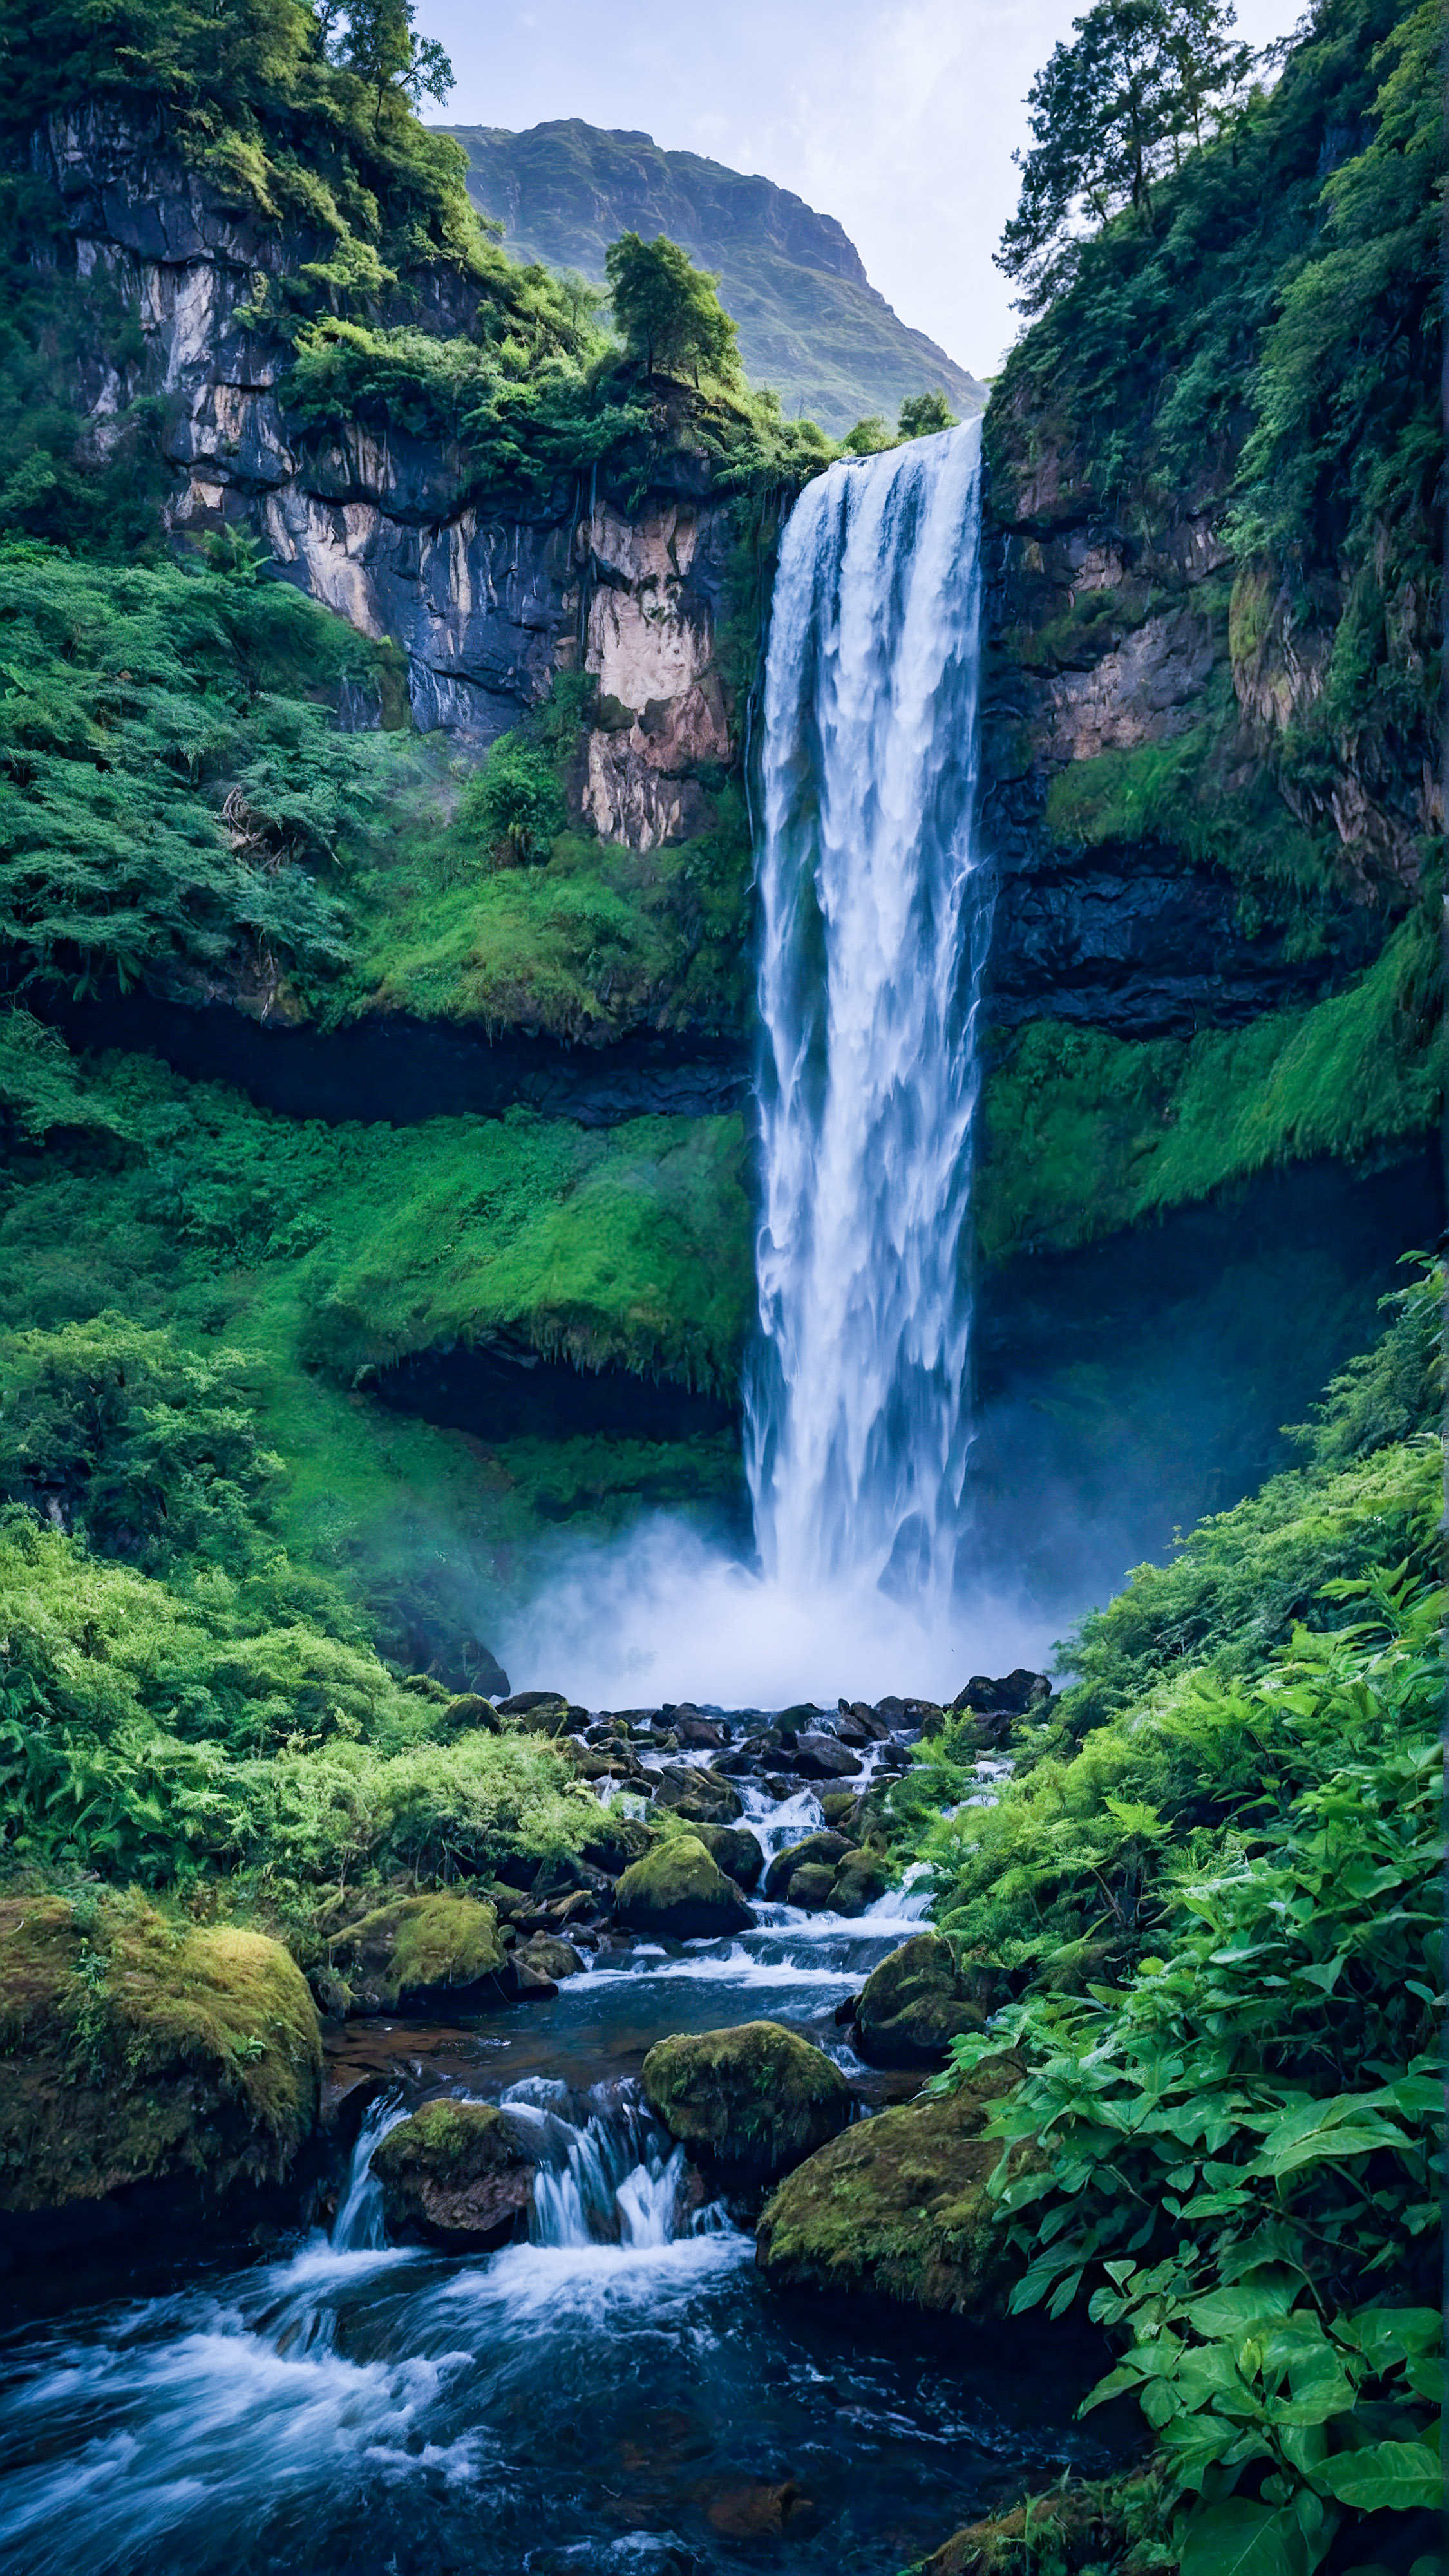 Discover the majesty of nature with our best iPhone wallpaper, depicting a majestic waterfall cascading down a mountain, surrounded by lush greenery.